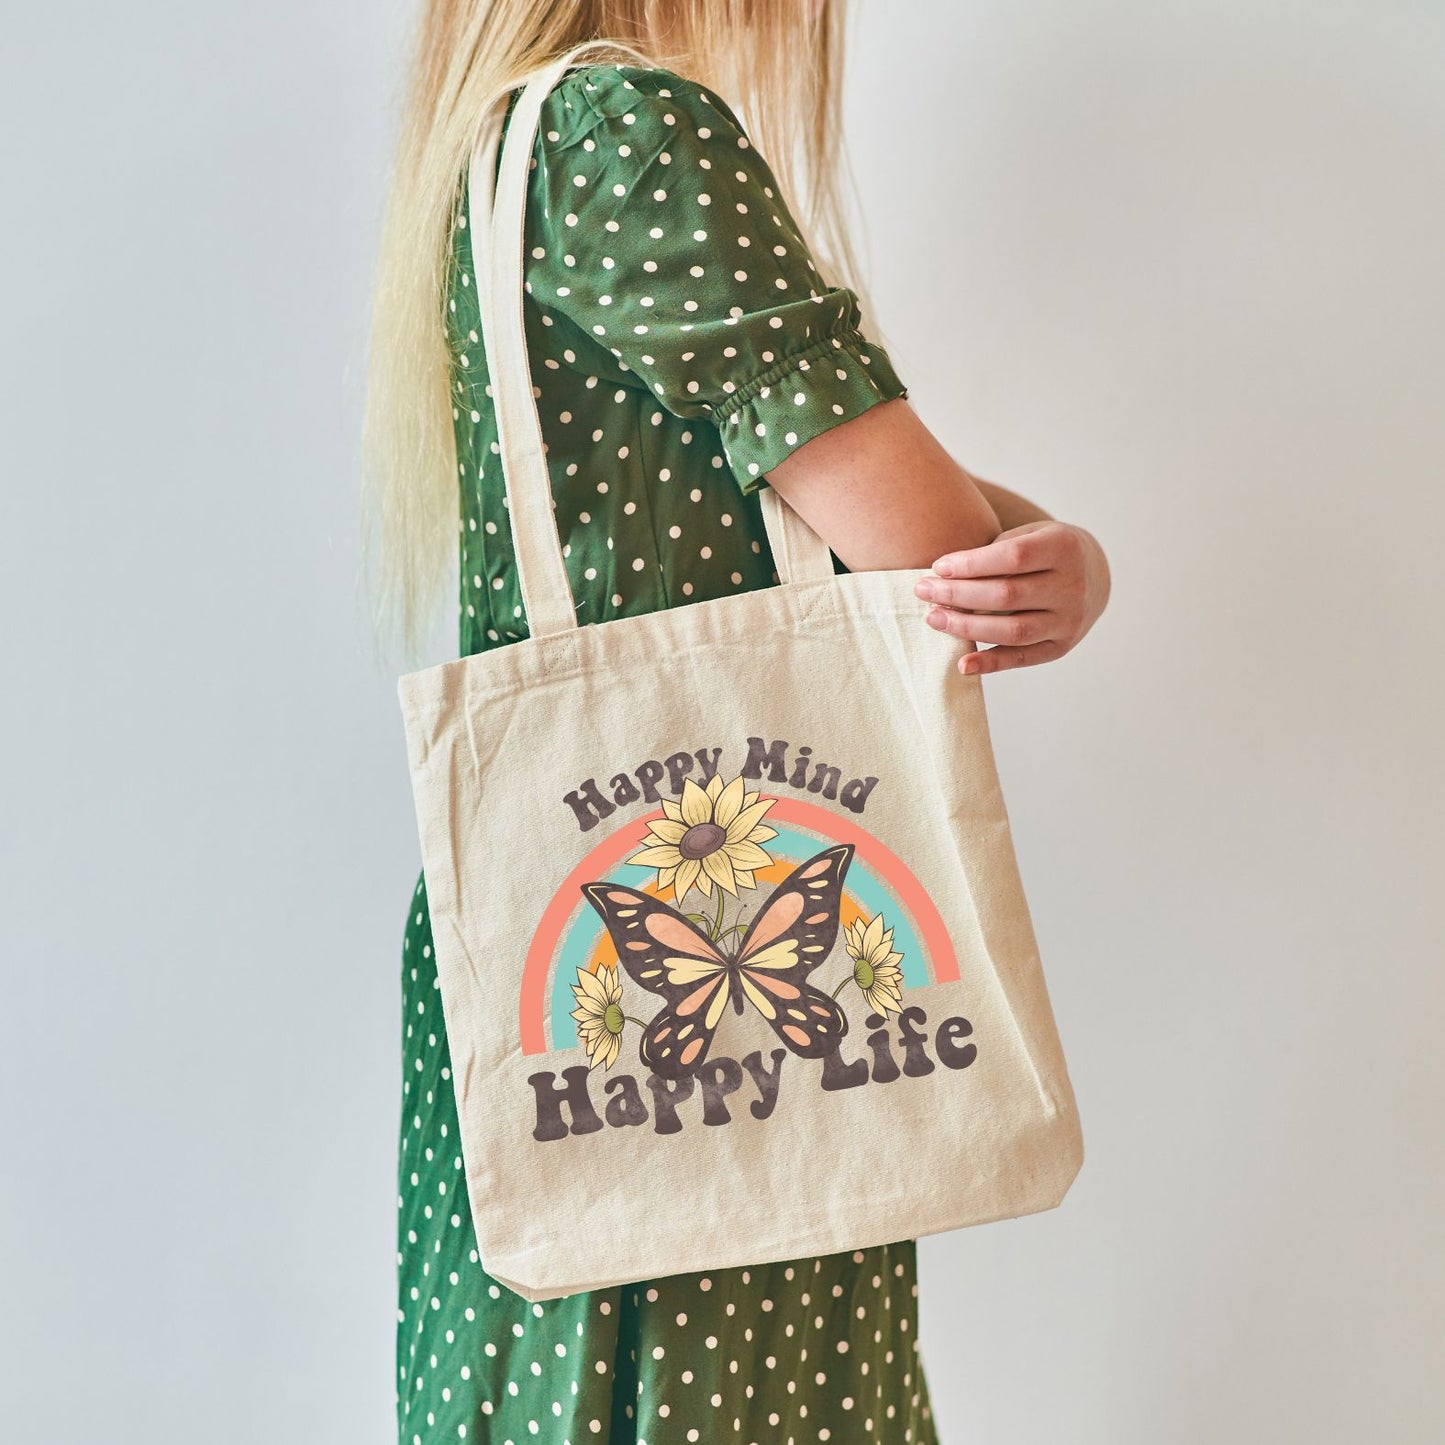 Shopping bag aesthetic 100% cotone naturale | Mod. Happy mind